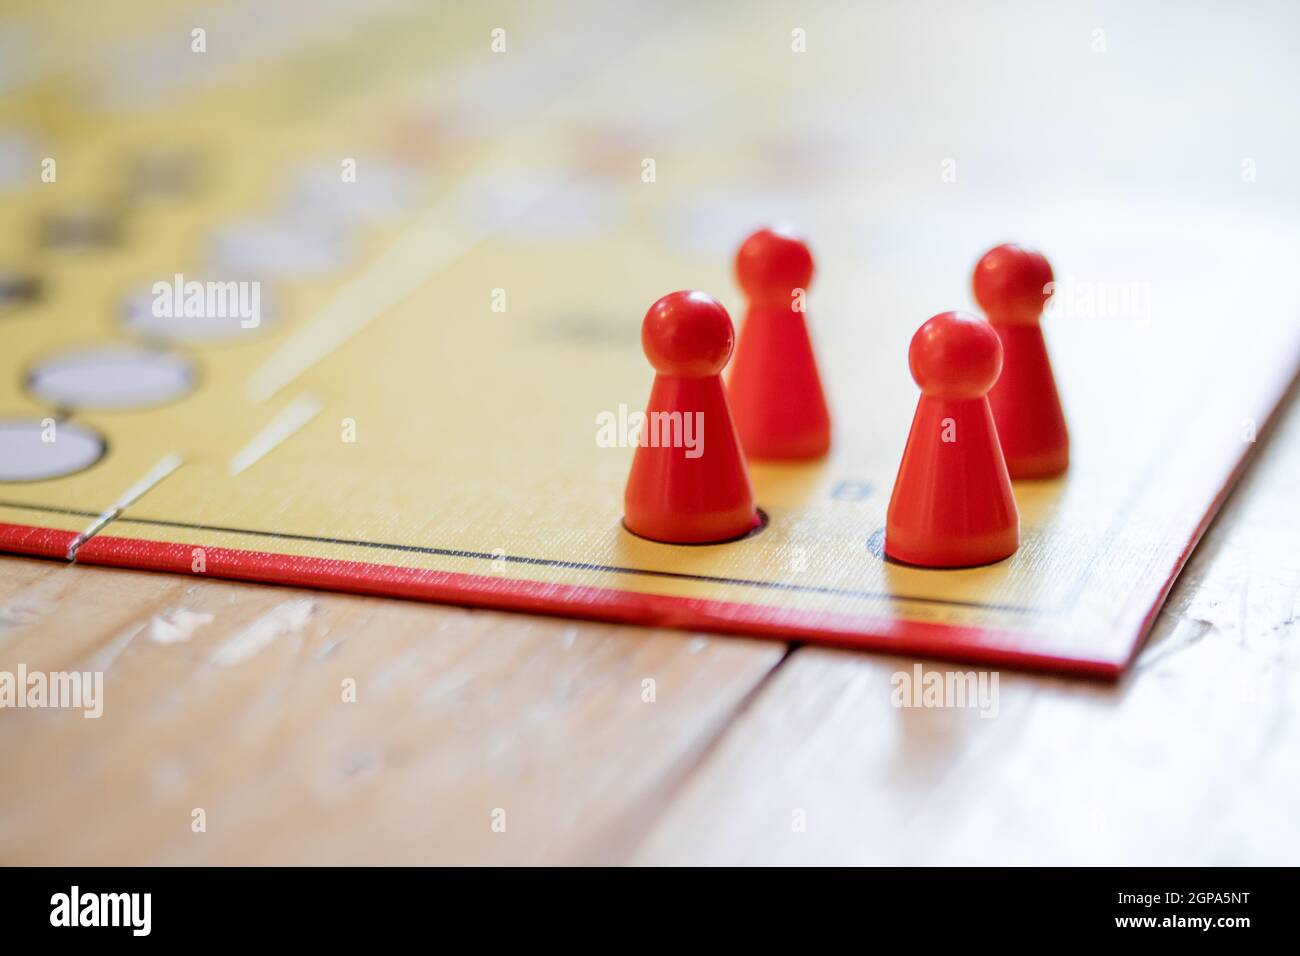 Meeples on a board, ready for playing a parlor game, ludo Stock Photo